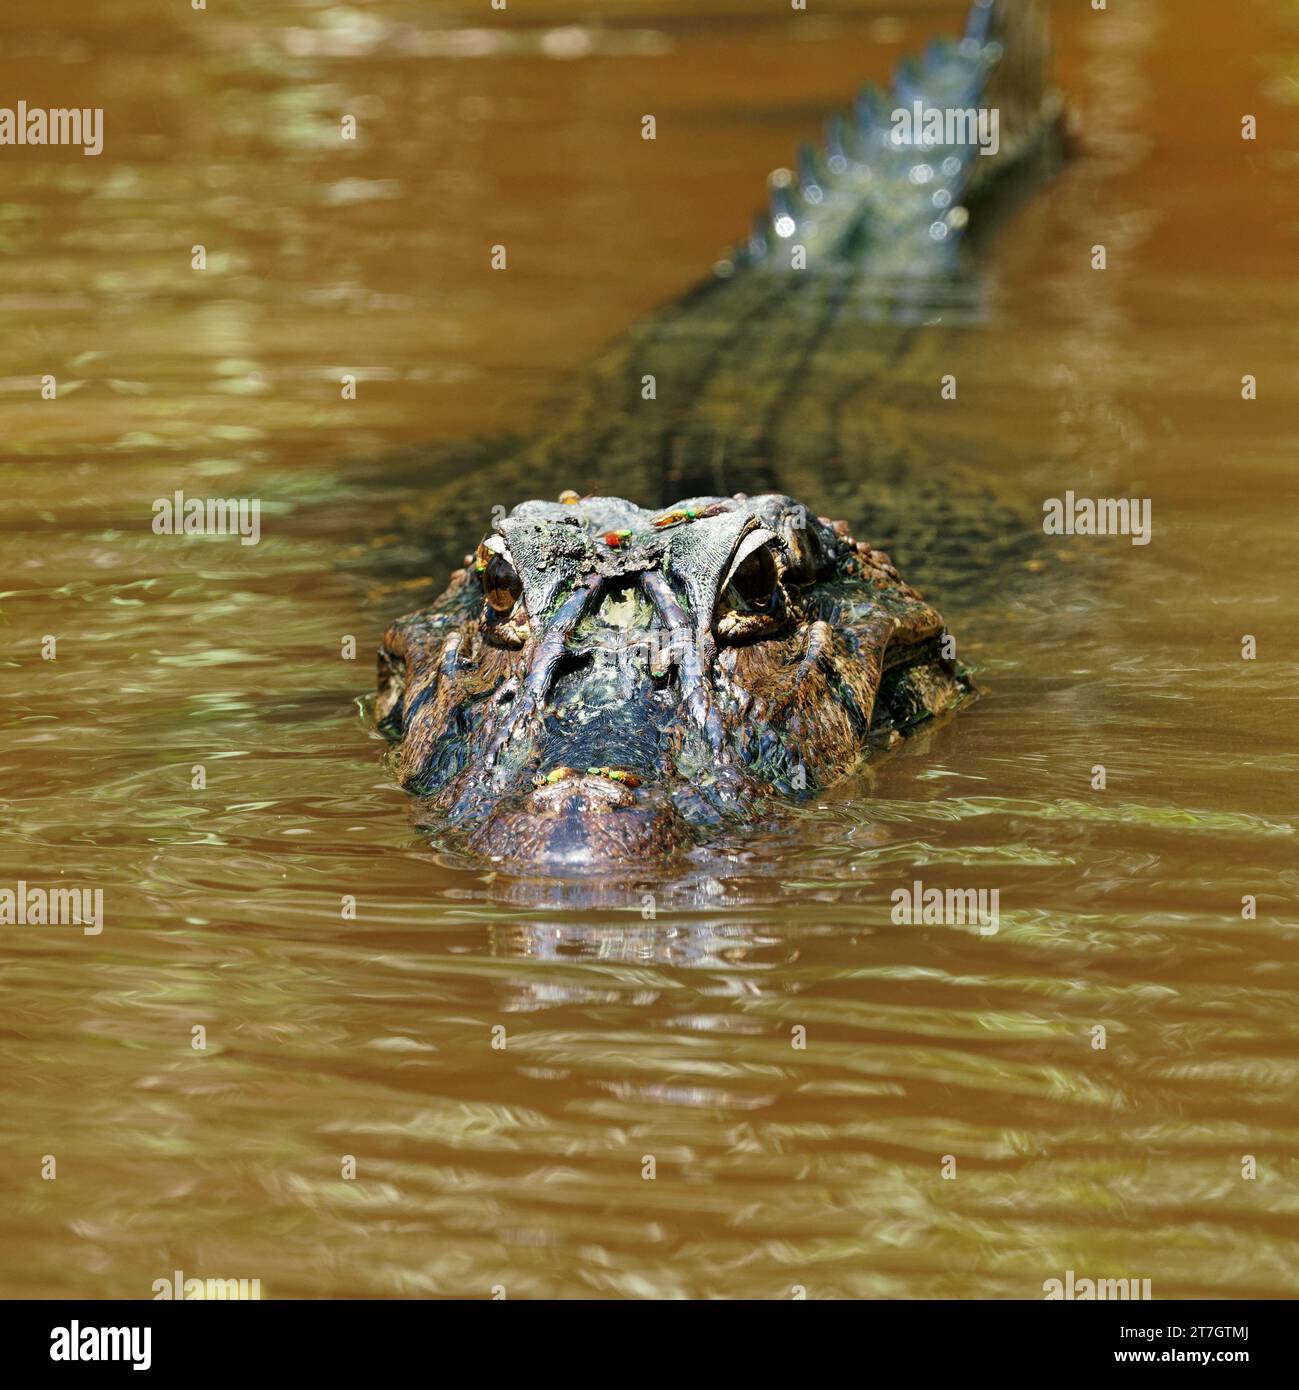 A caiman lurking at the river's edge in the Amazonian rainforest, Cuyabeno Reserve in the Amazon Region between Ecuador and Peru. Stock Photo